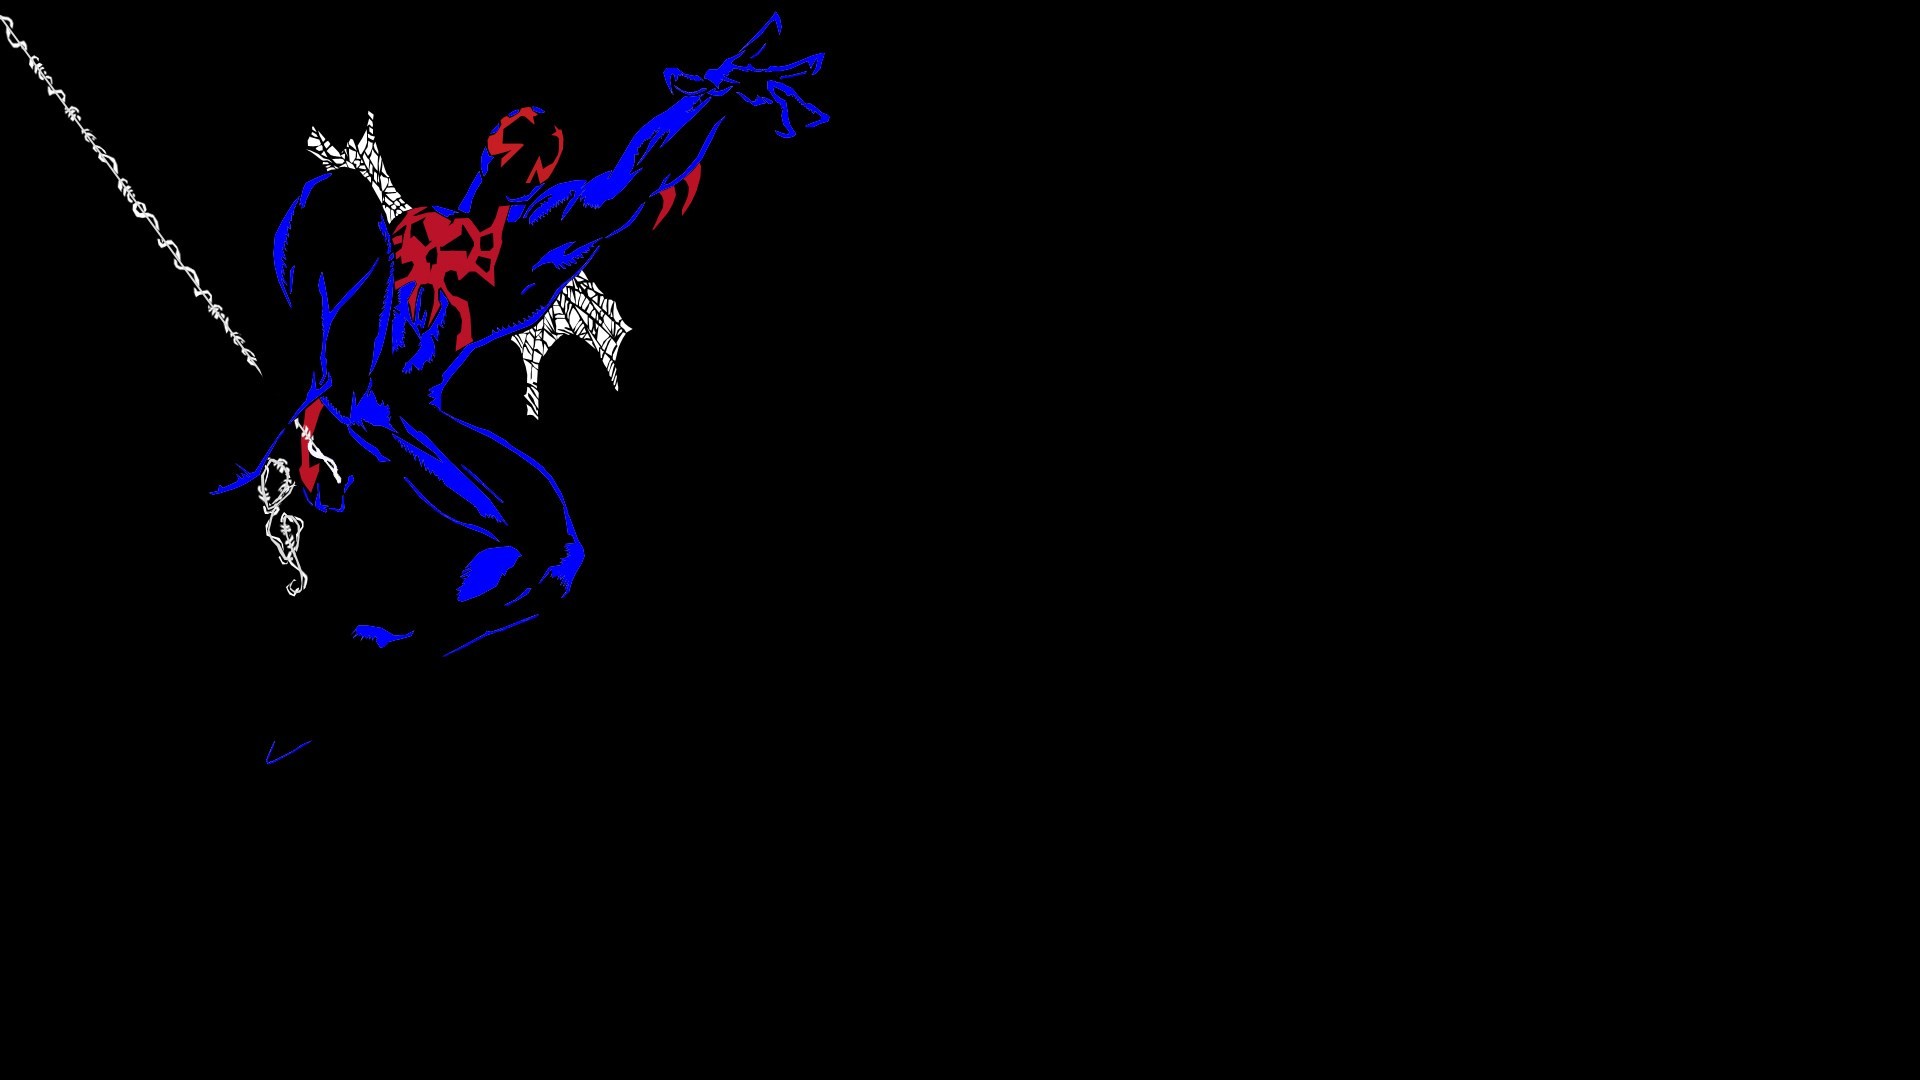 Spider man 2099 theme picture by Gauge Kingsman 2017 03 09